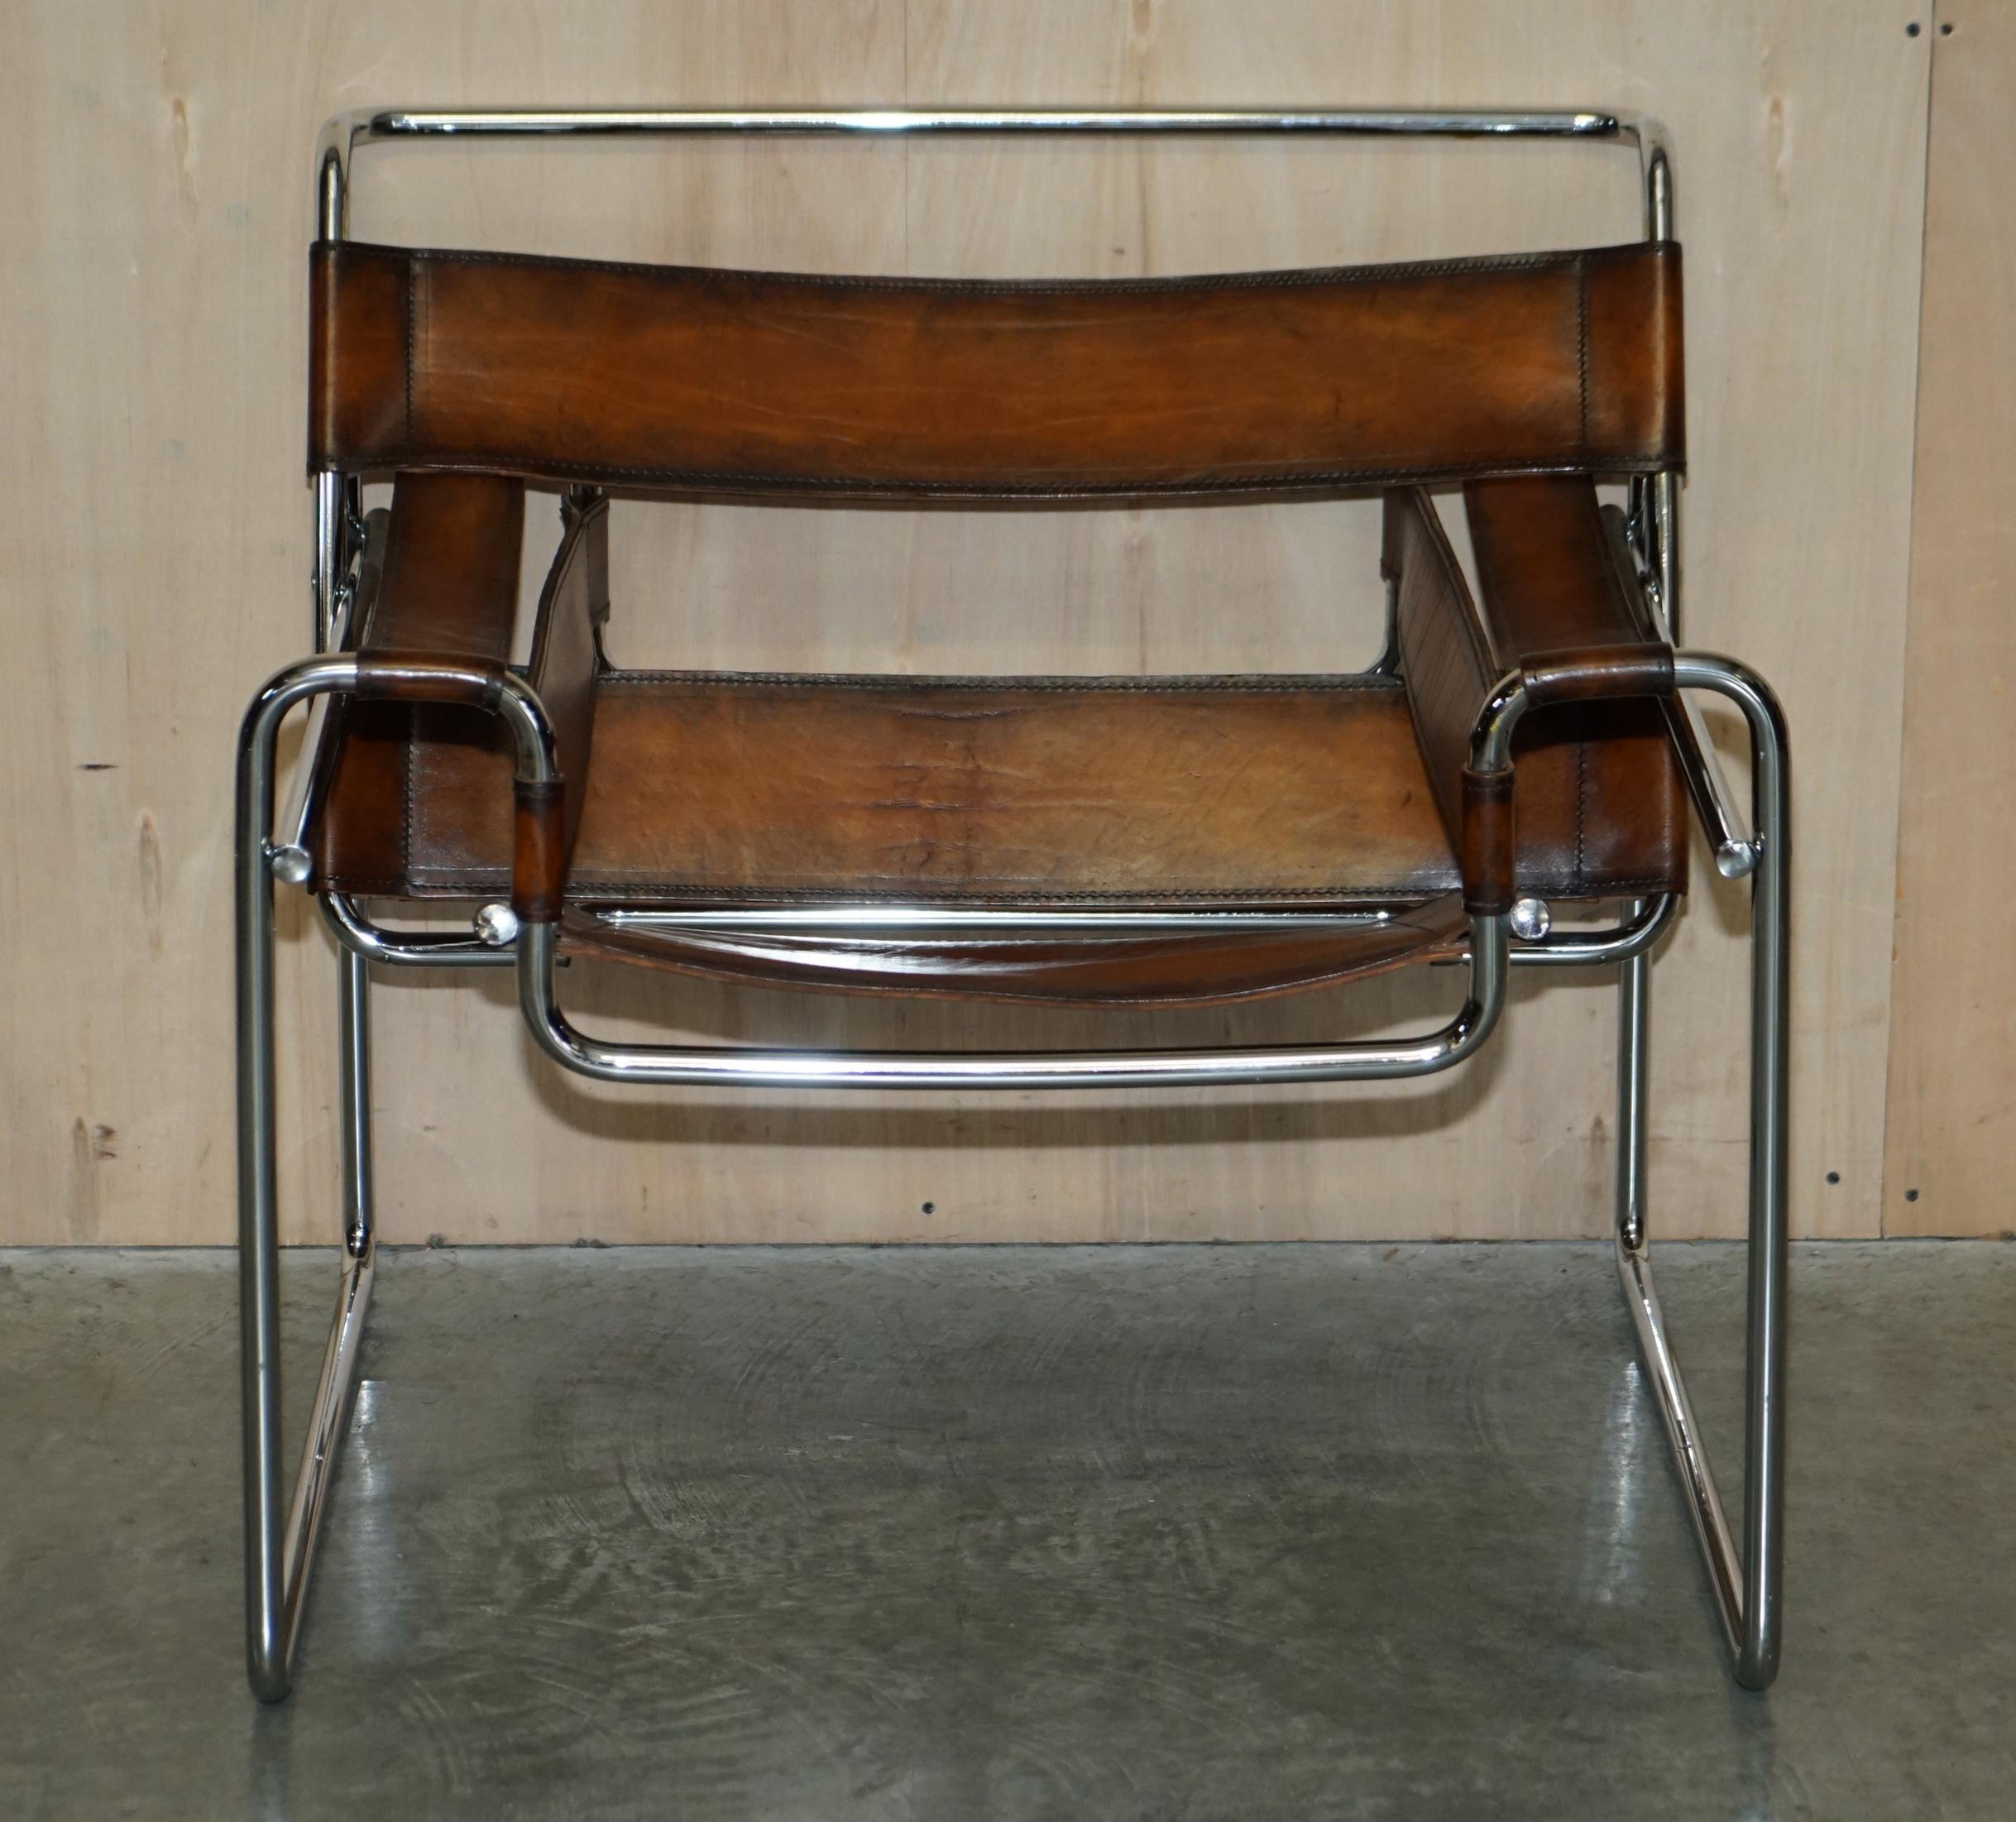 We are delighted to offer for sale this stunning vintage 1970s Marcel Breuer for Fasem Wassily B3 tan brown leather armchair

A timeless design Classic, upholstered in tan leather hide and with a tubular chrome frame, these chairs are iconic and